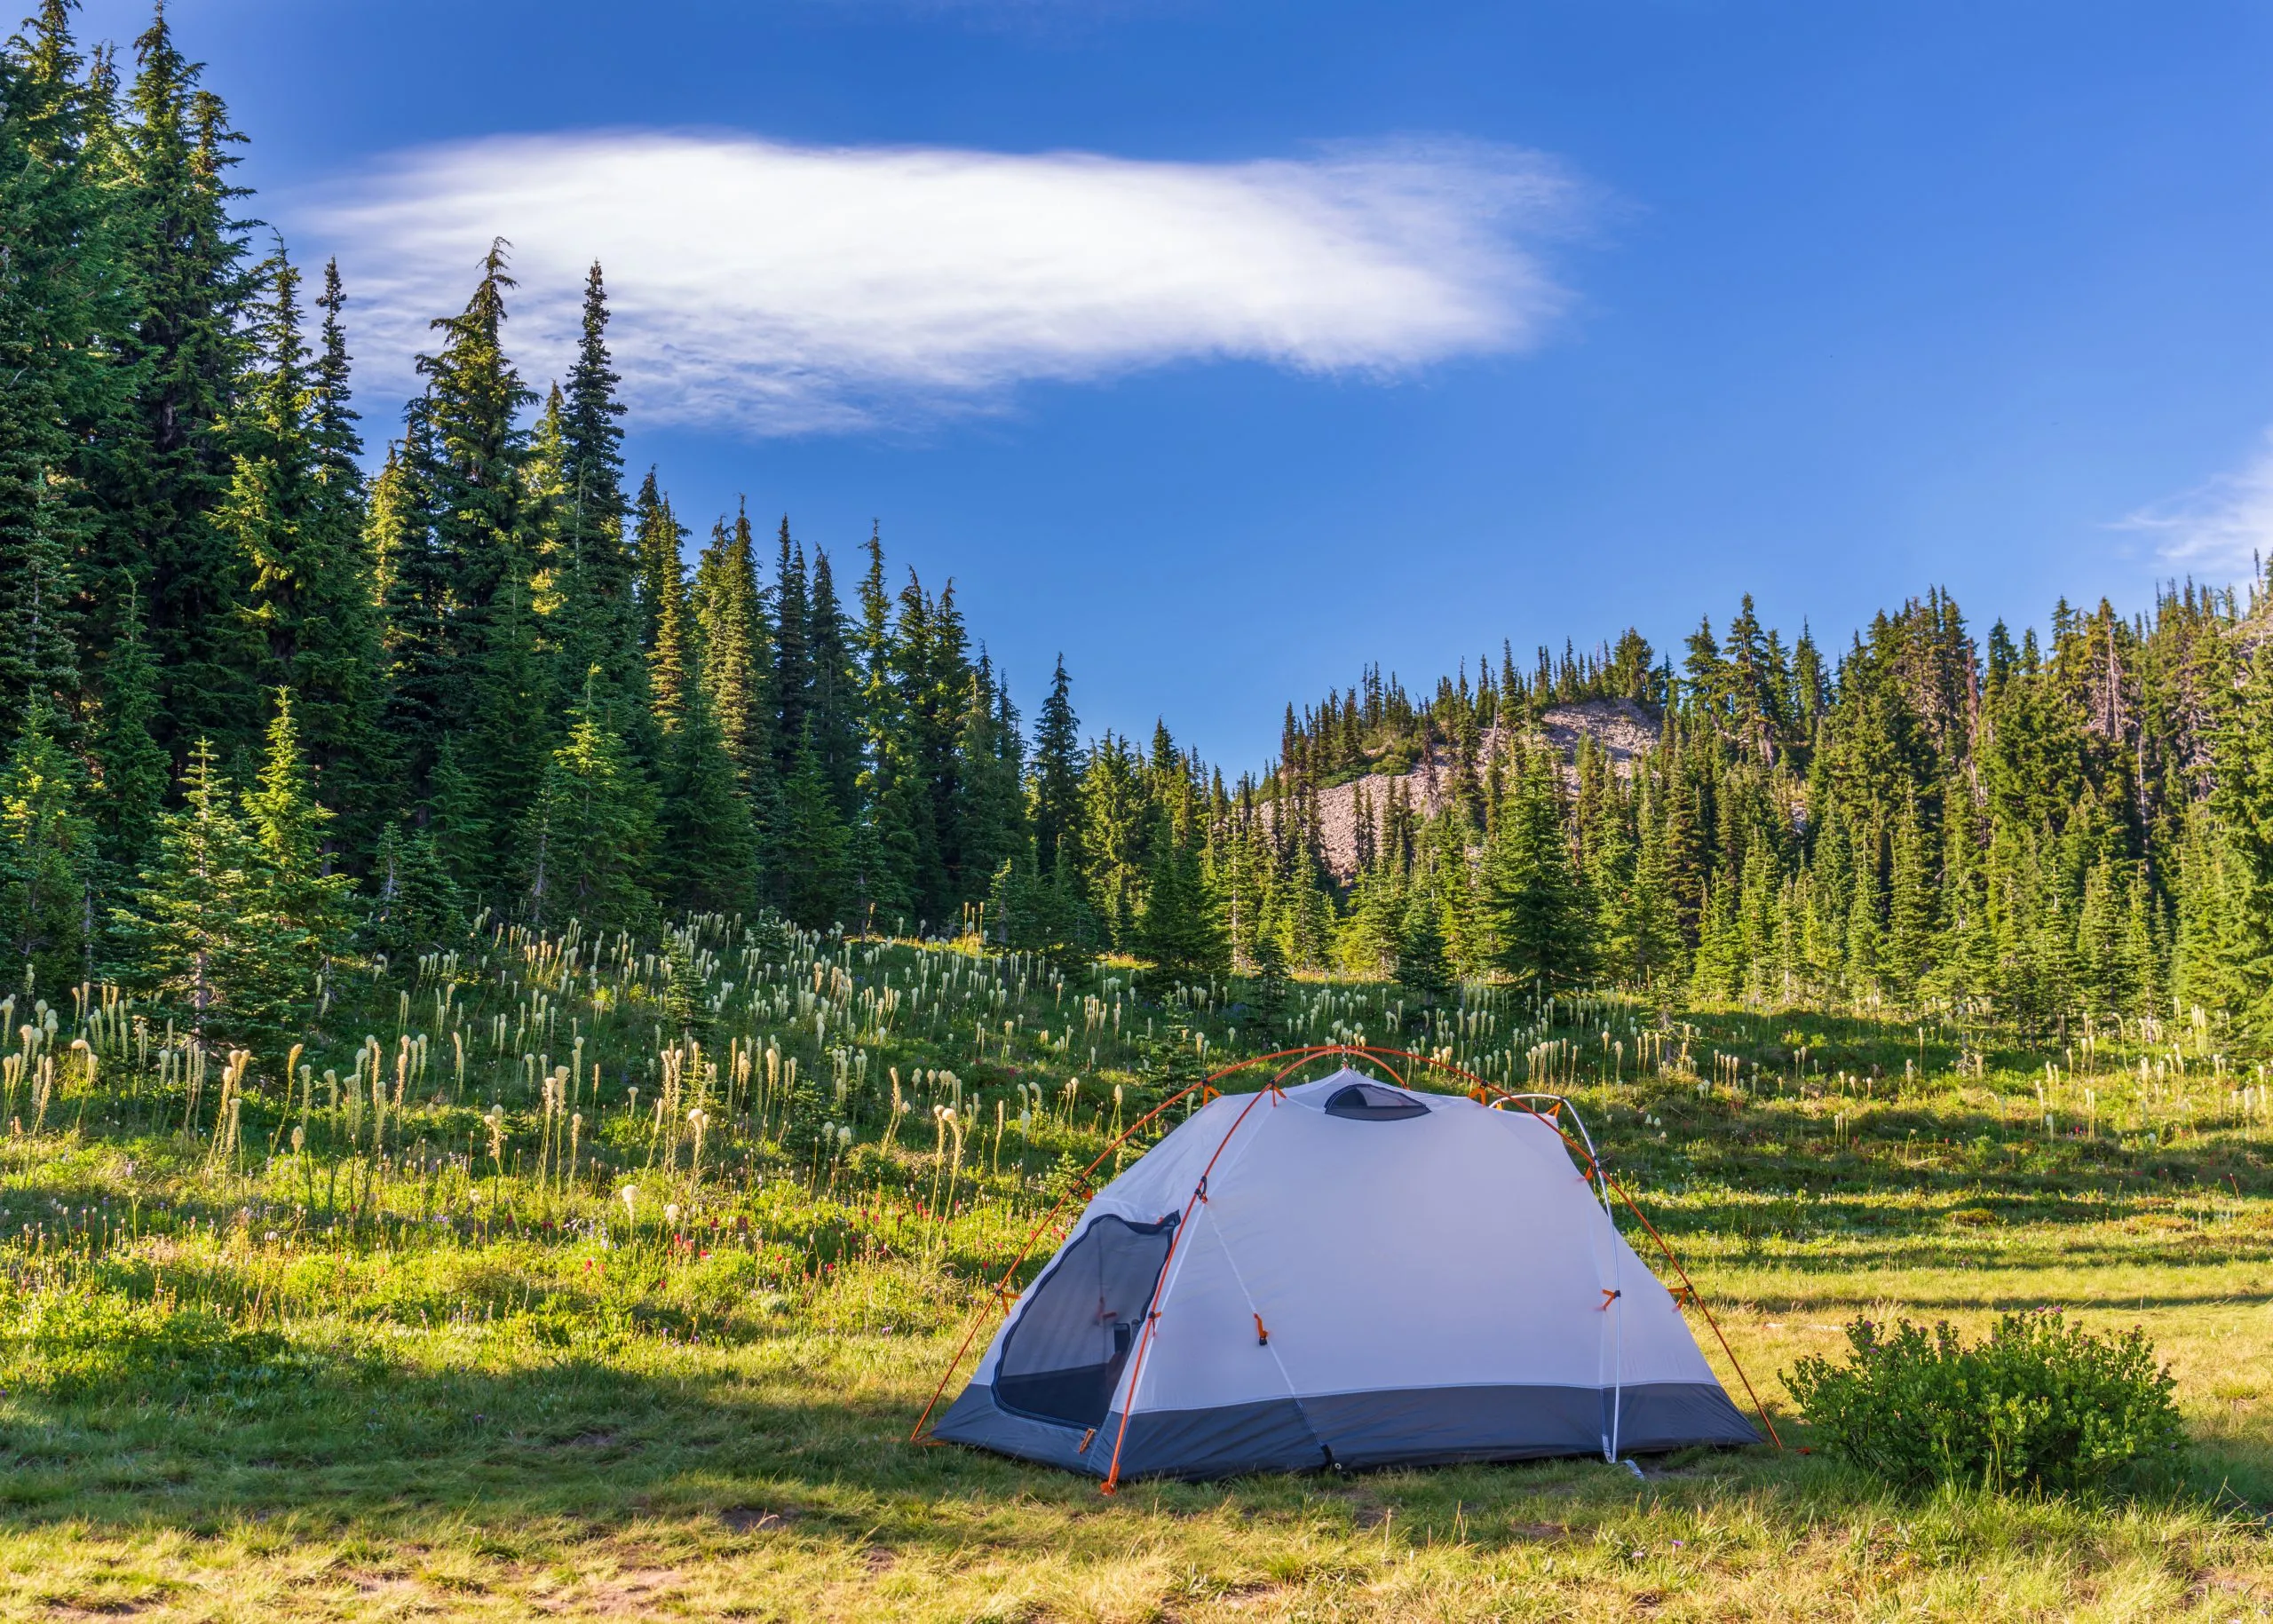 A backcountry tent among alpine meadow wildflowers at Goat Rocks Wilderness Area